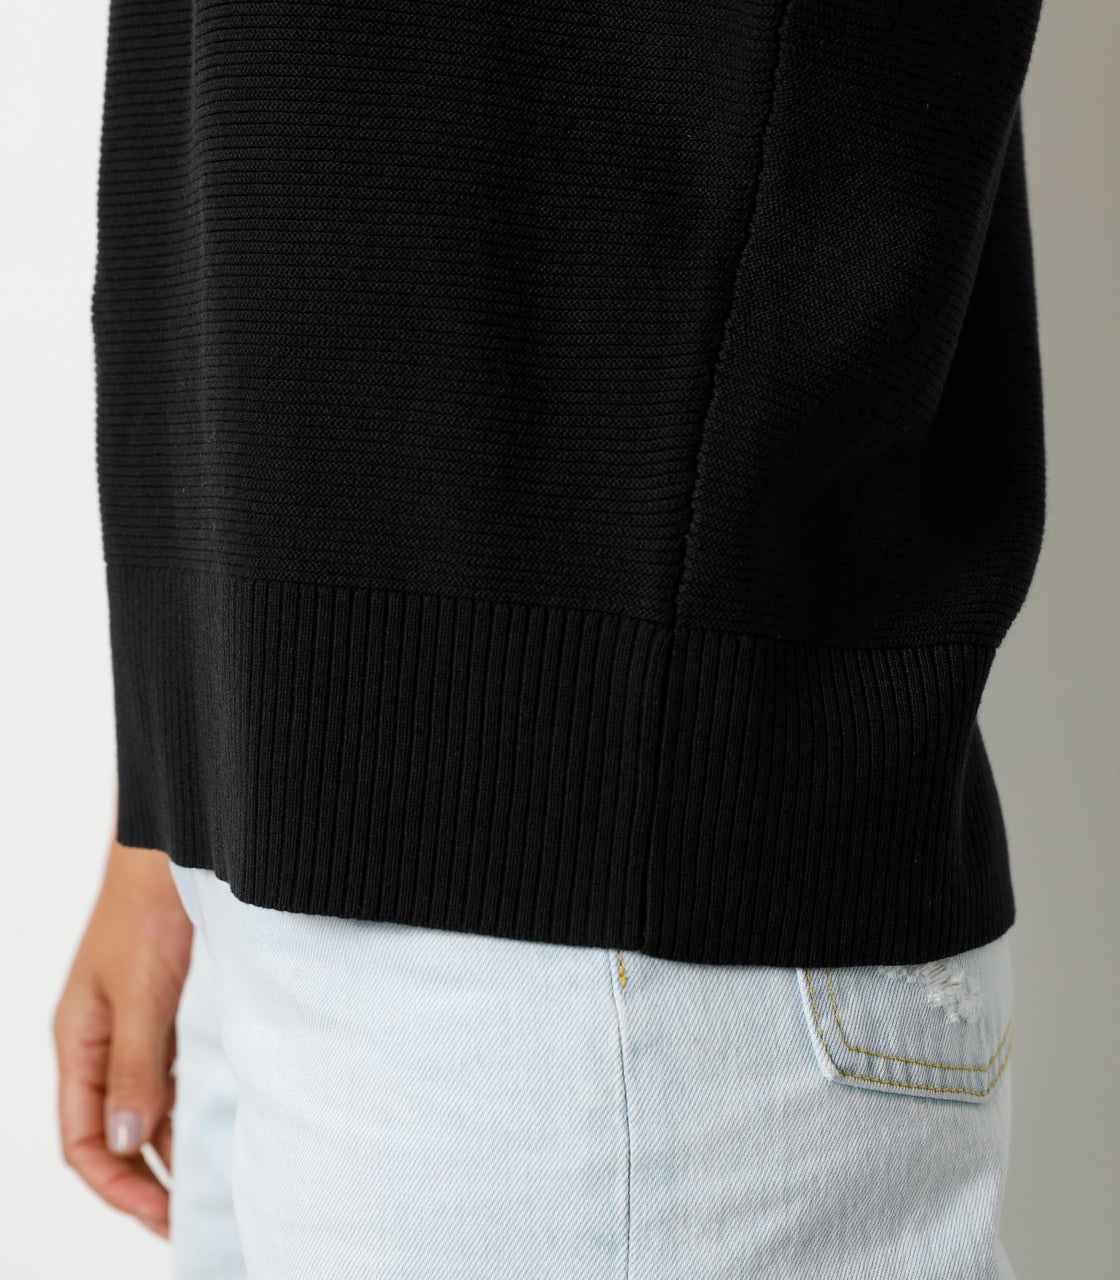 LOOSE PANEL KNIT TOP/ルーズパネルニットトップ 詳細画像 BLK 9